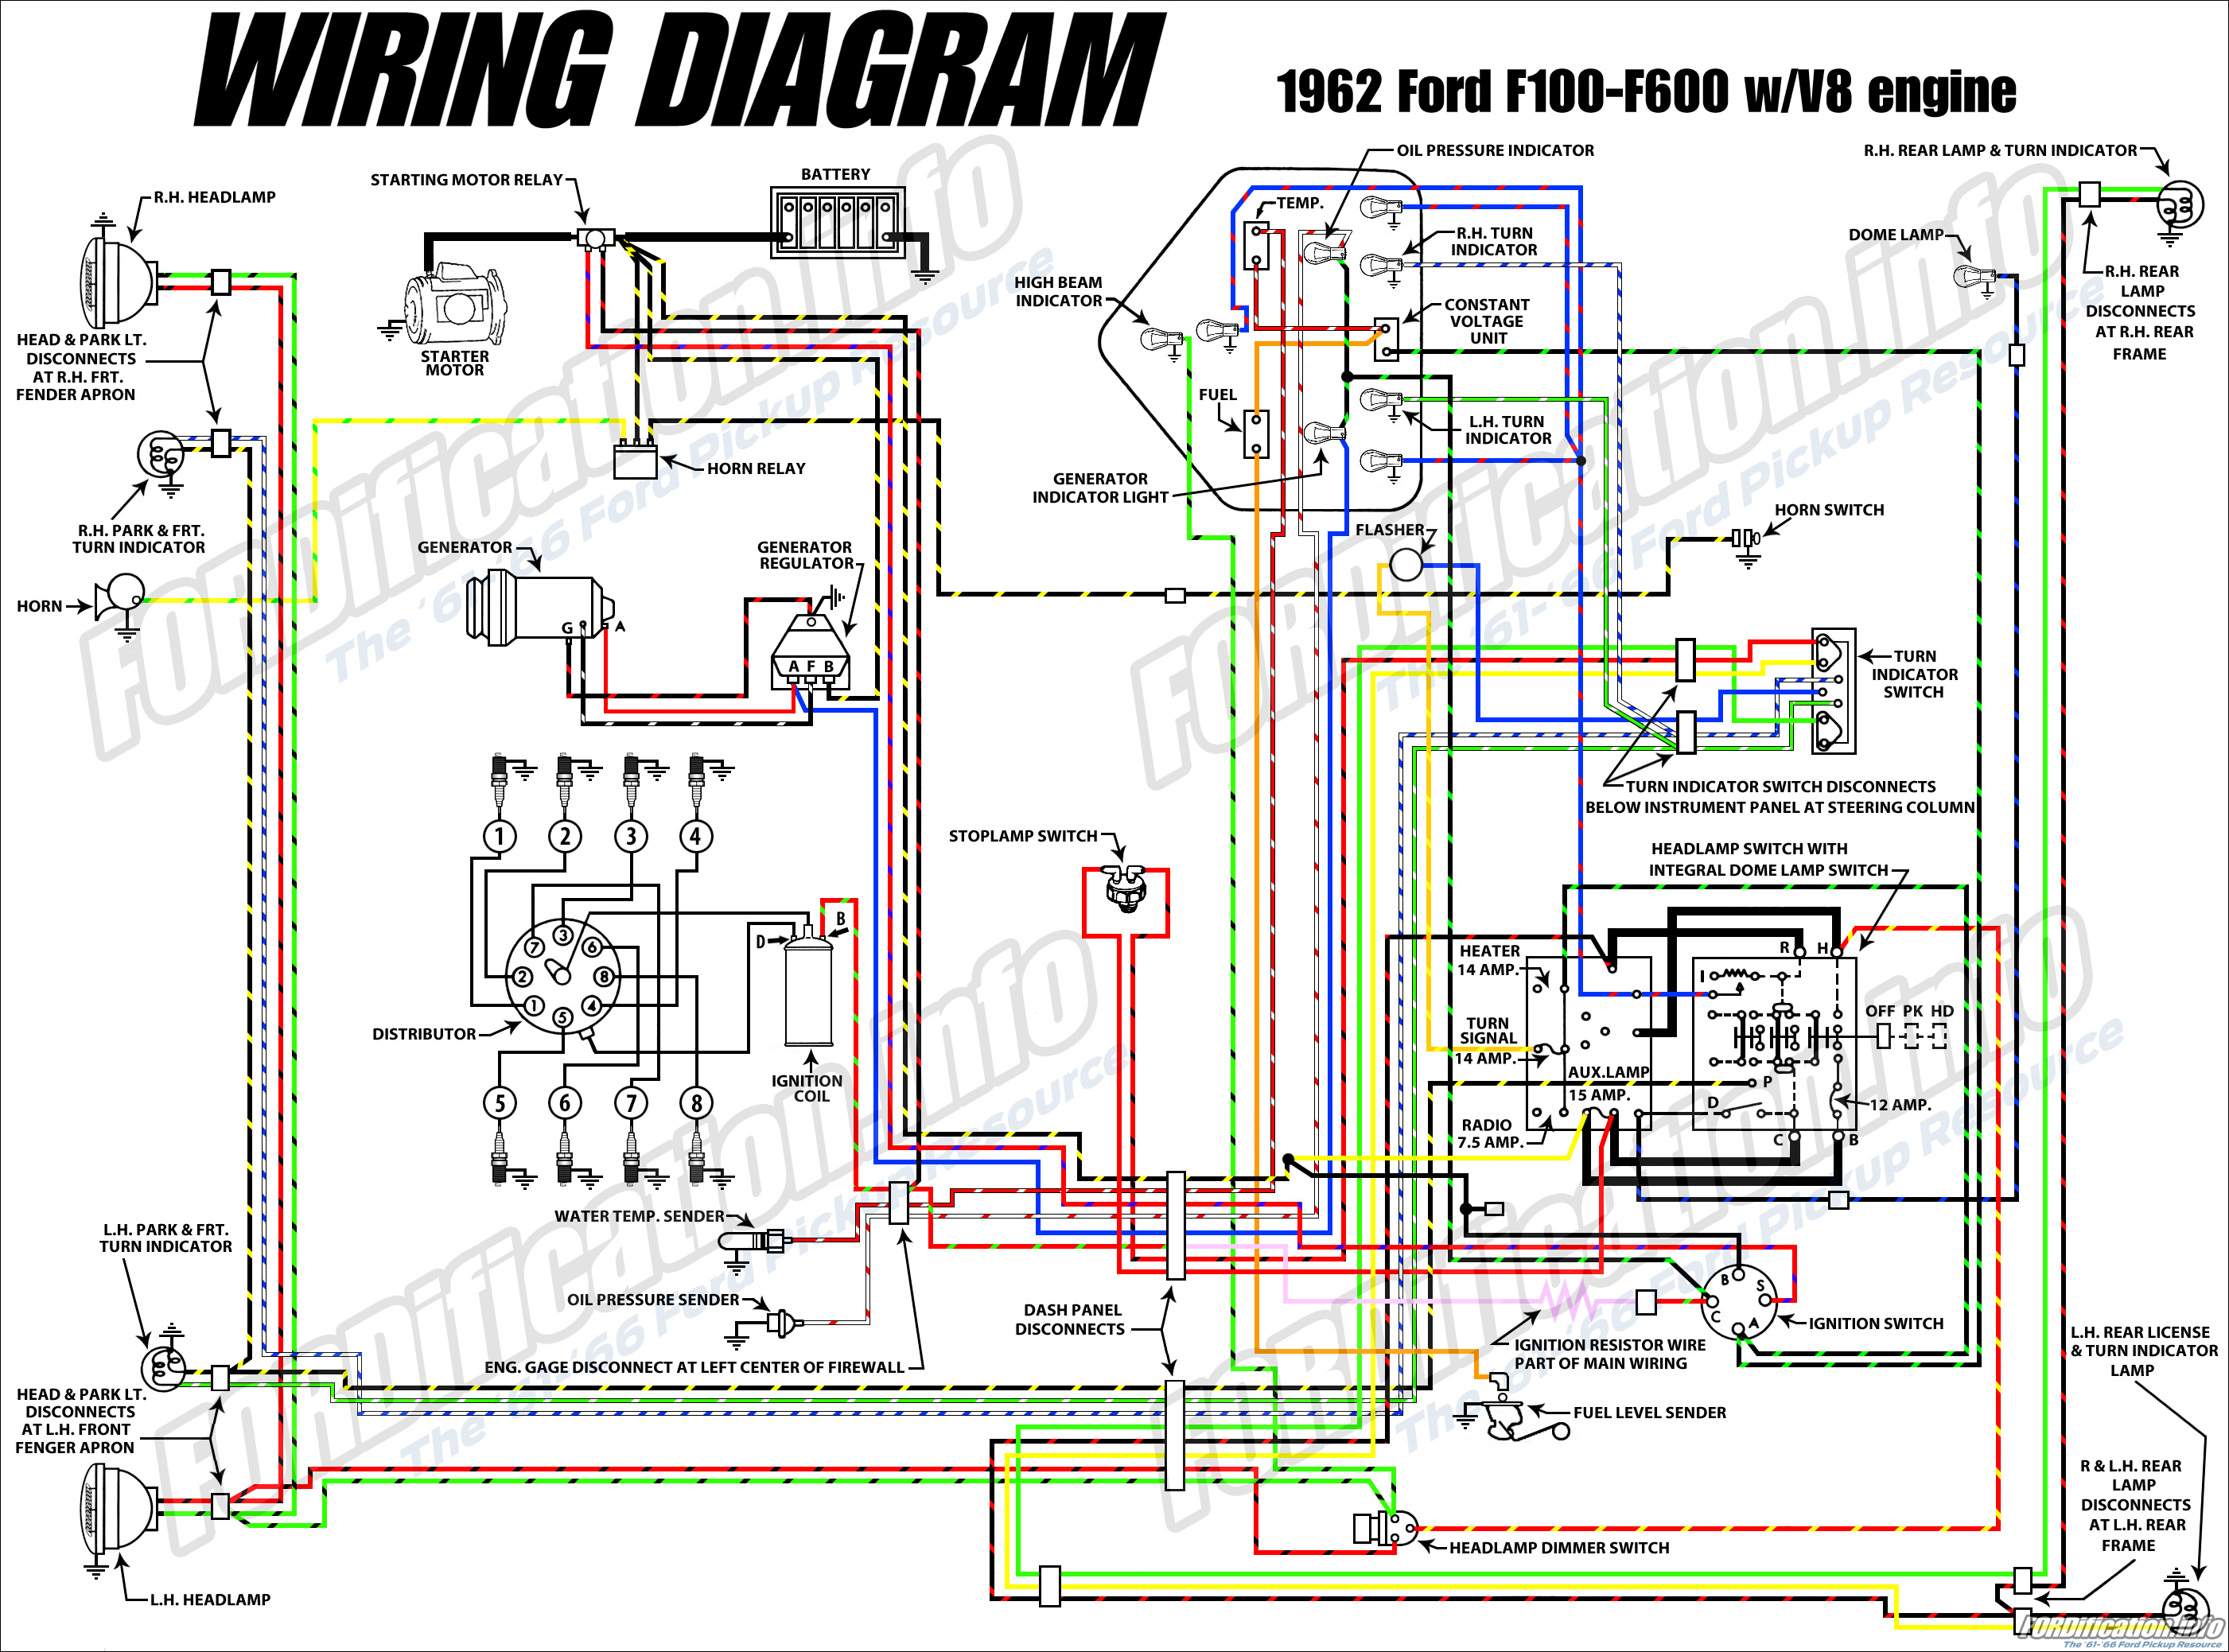 1962 Ford Truck Wiring Diagrams - FORDification.info - The ... 1954 international pickup wiring diagram 